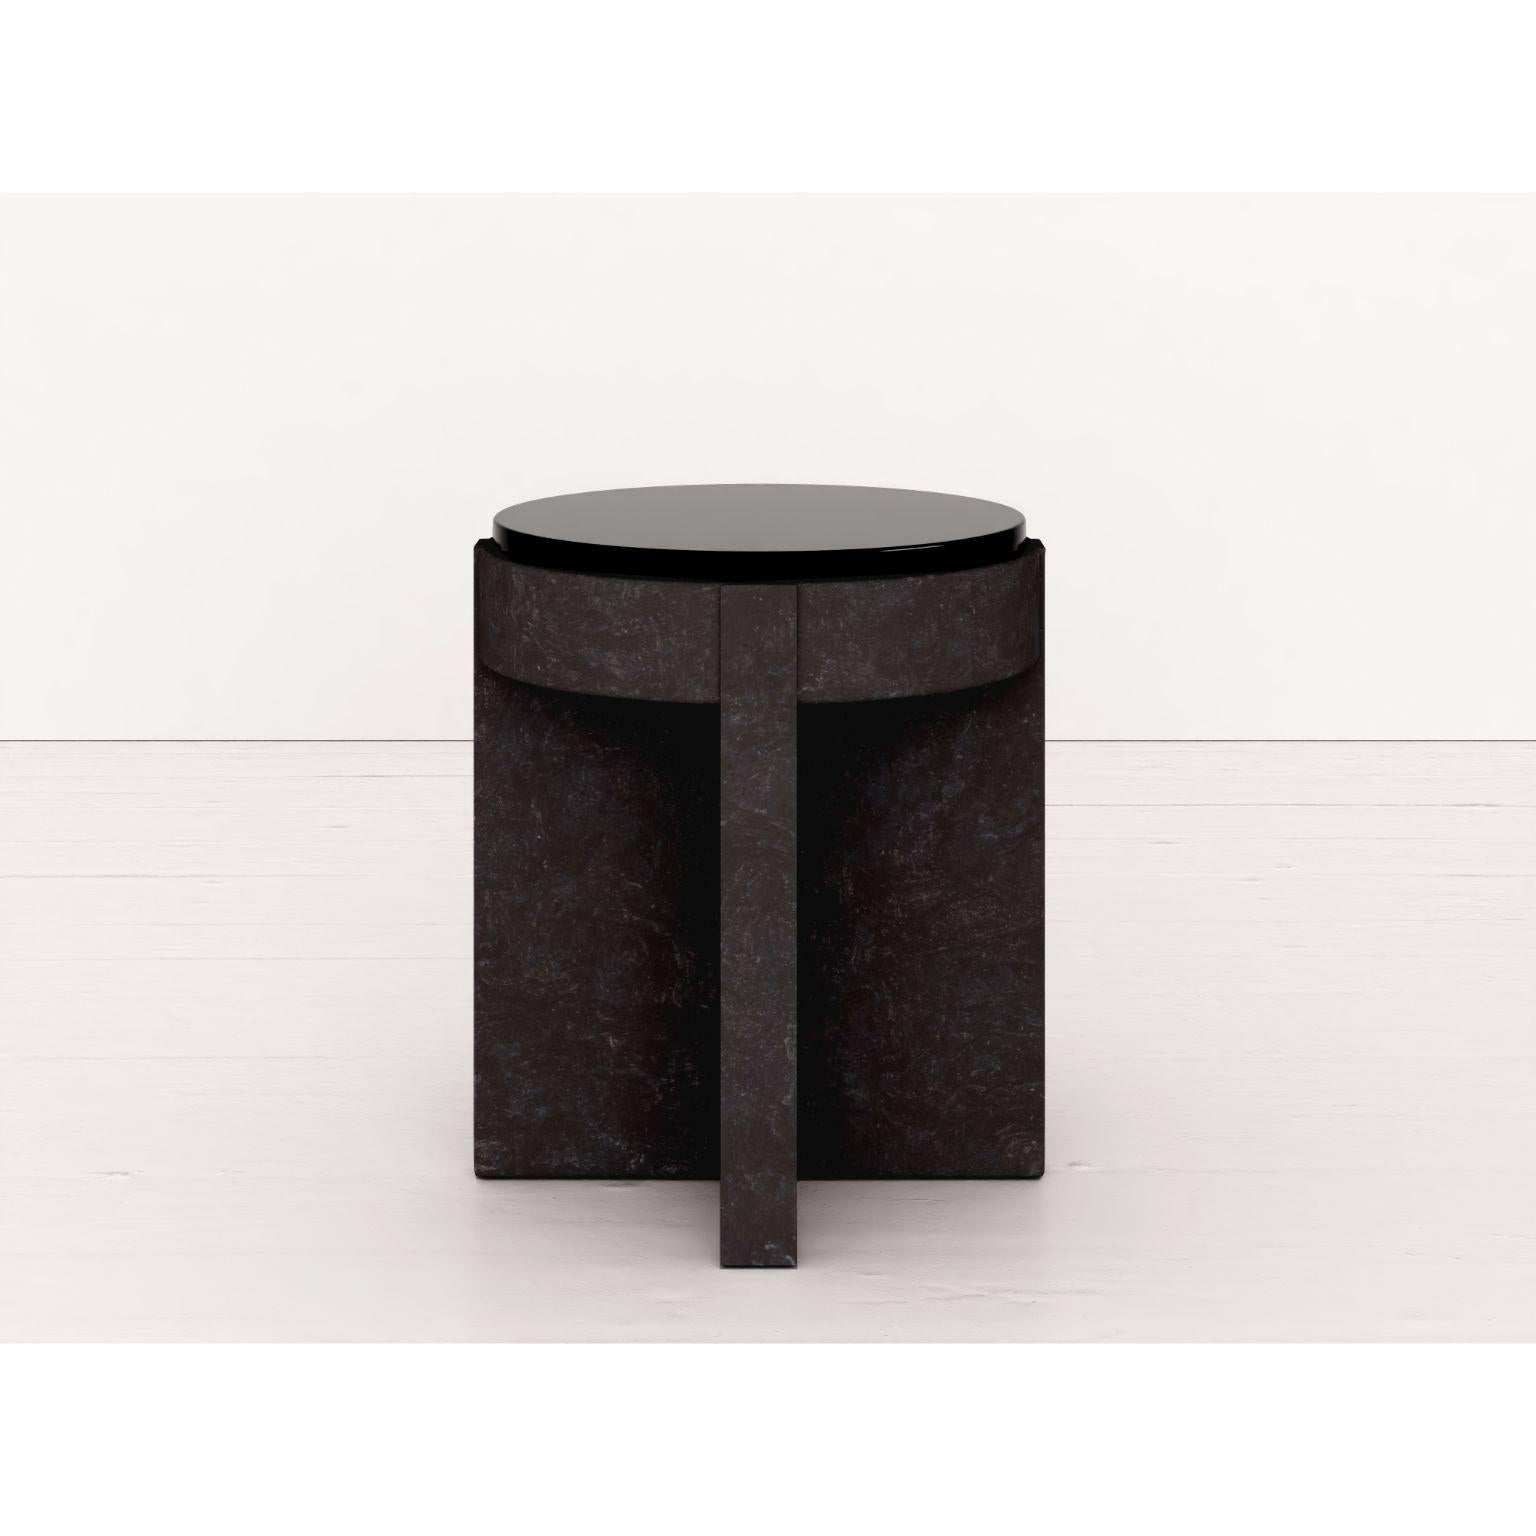 Object 05 Black Seating by Volta
One Of A Kind.
Dimensions: D 40,5 x W 40,5 x H 47 cm.
Materials: Cork and ceramic.

Also available in diffentent colors. Please contact us.

MEÏ COLLECTION
The Meï collection was born from the desire to highlight the